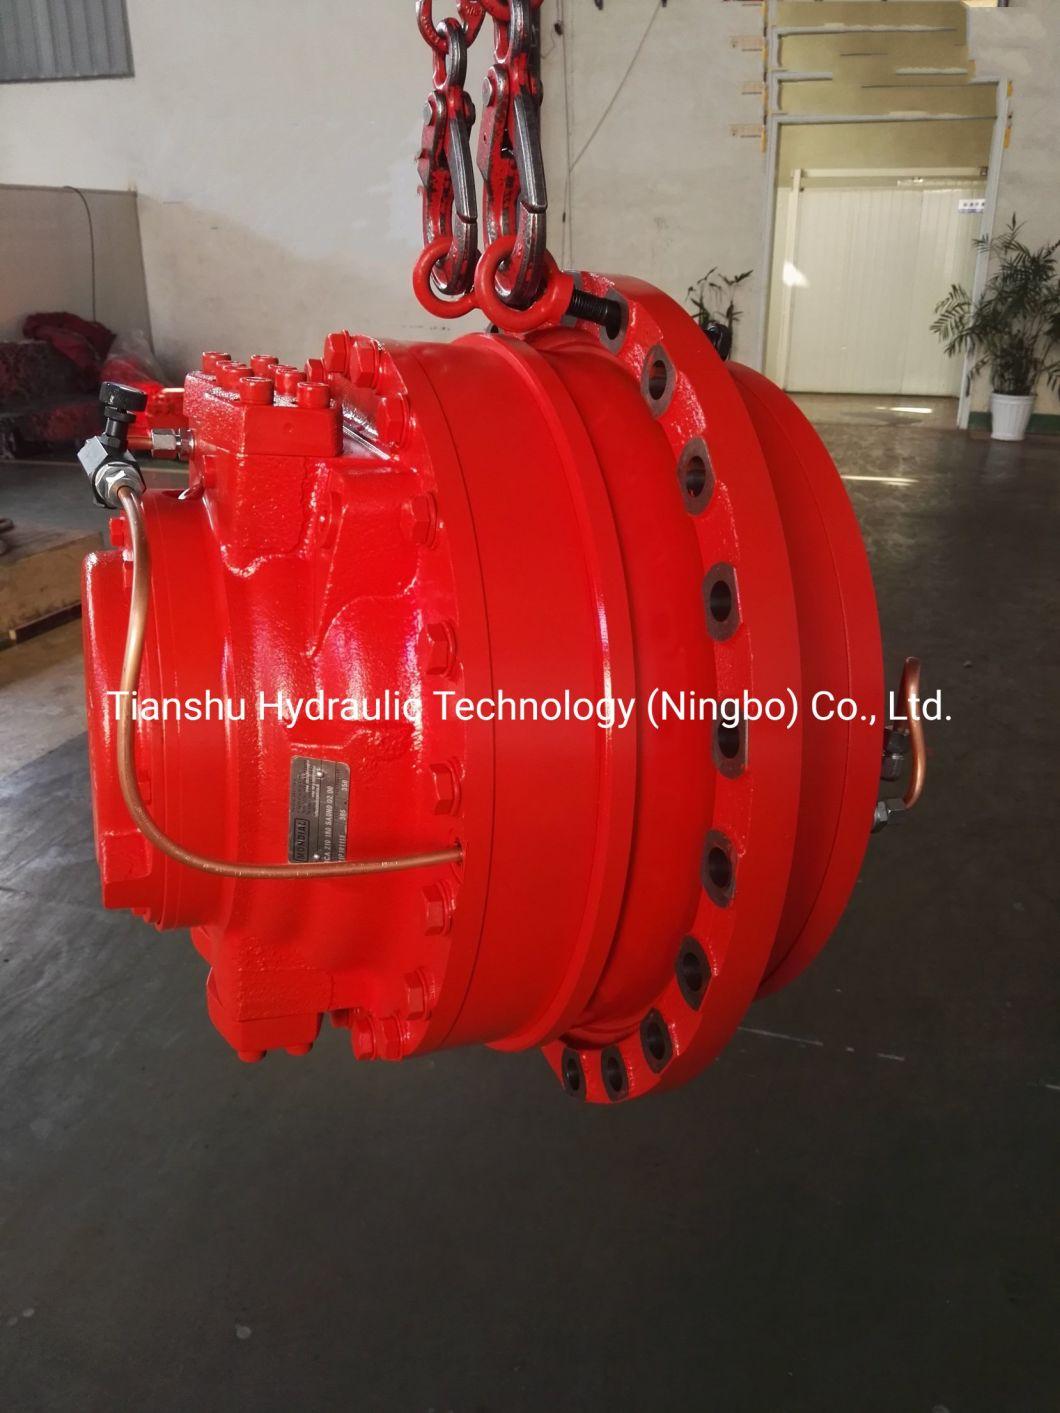 Rexroth Hagglunds Radial Piston Hydraulic Motor Ca70 Ca140 Ca210 with Hydraulic Valve and Reducer From Chinese Factory.